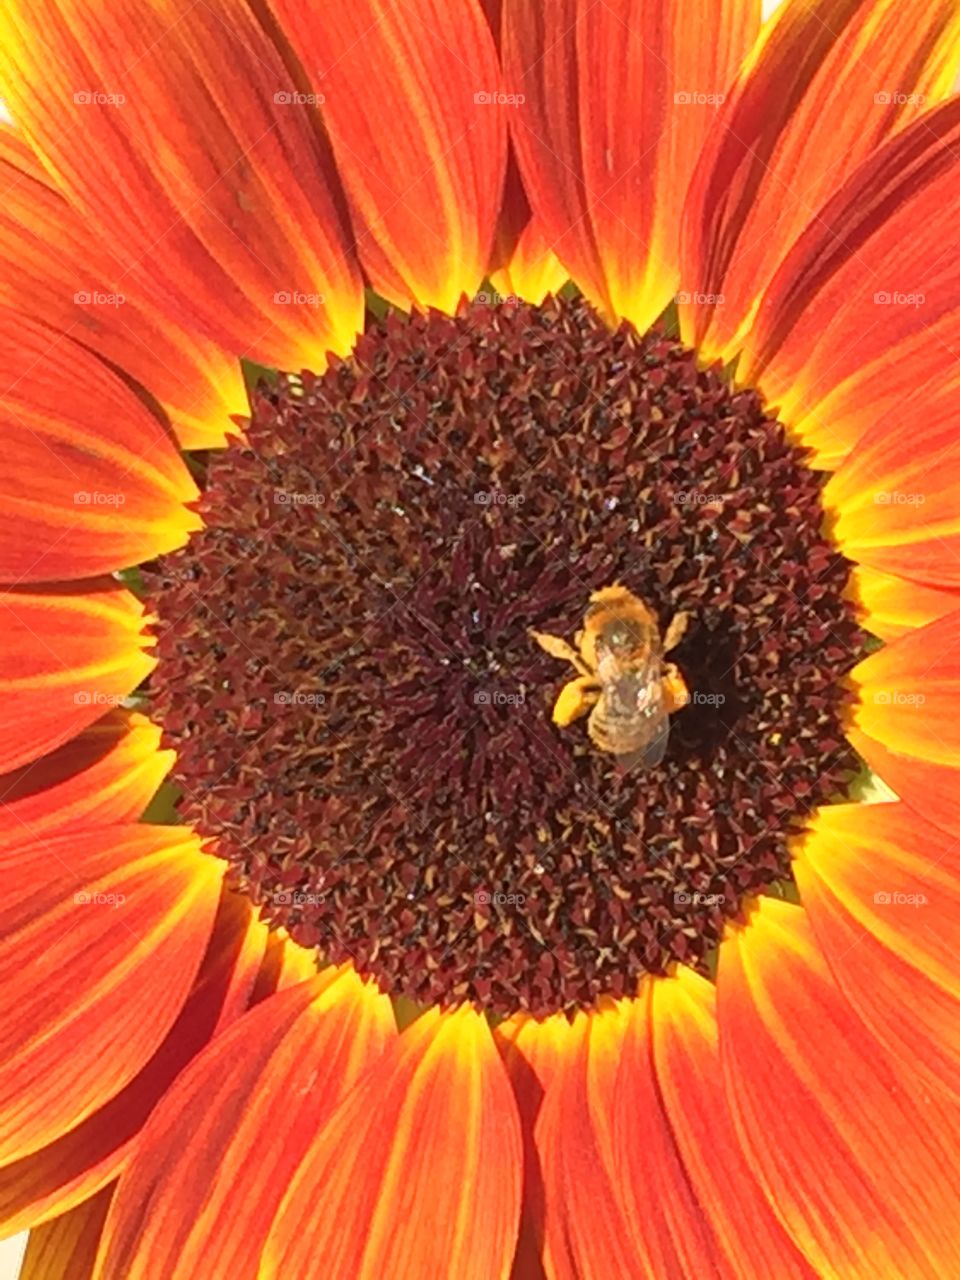 Bee with pollen coated legs on sunflower 